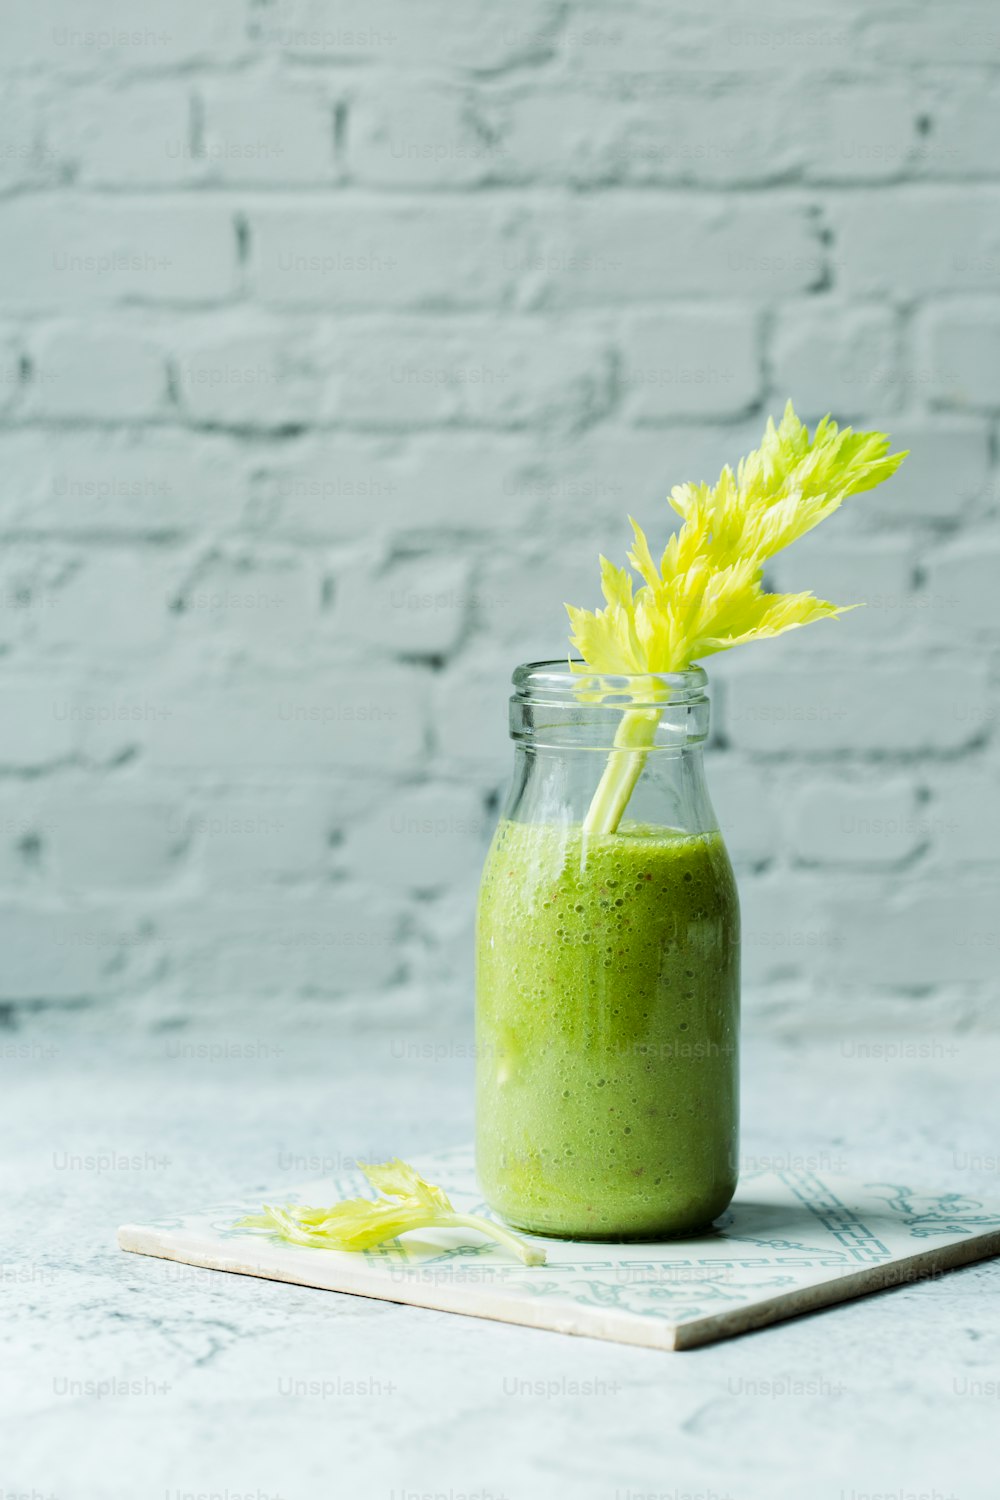 a green smoothie in a glass jar with a yellow flower